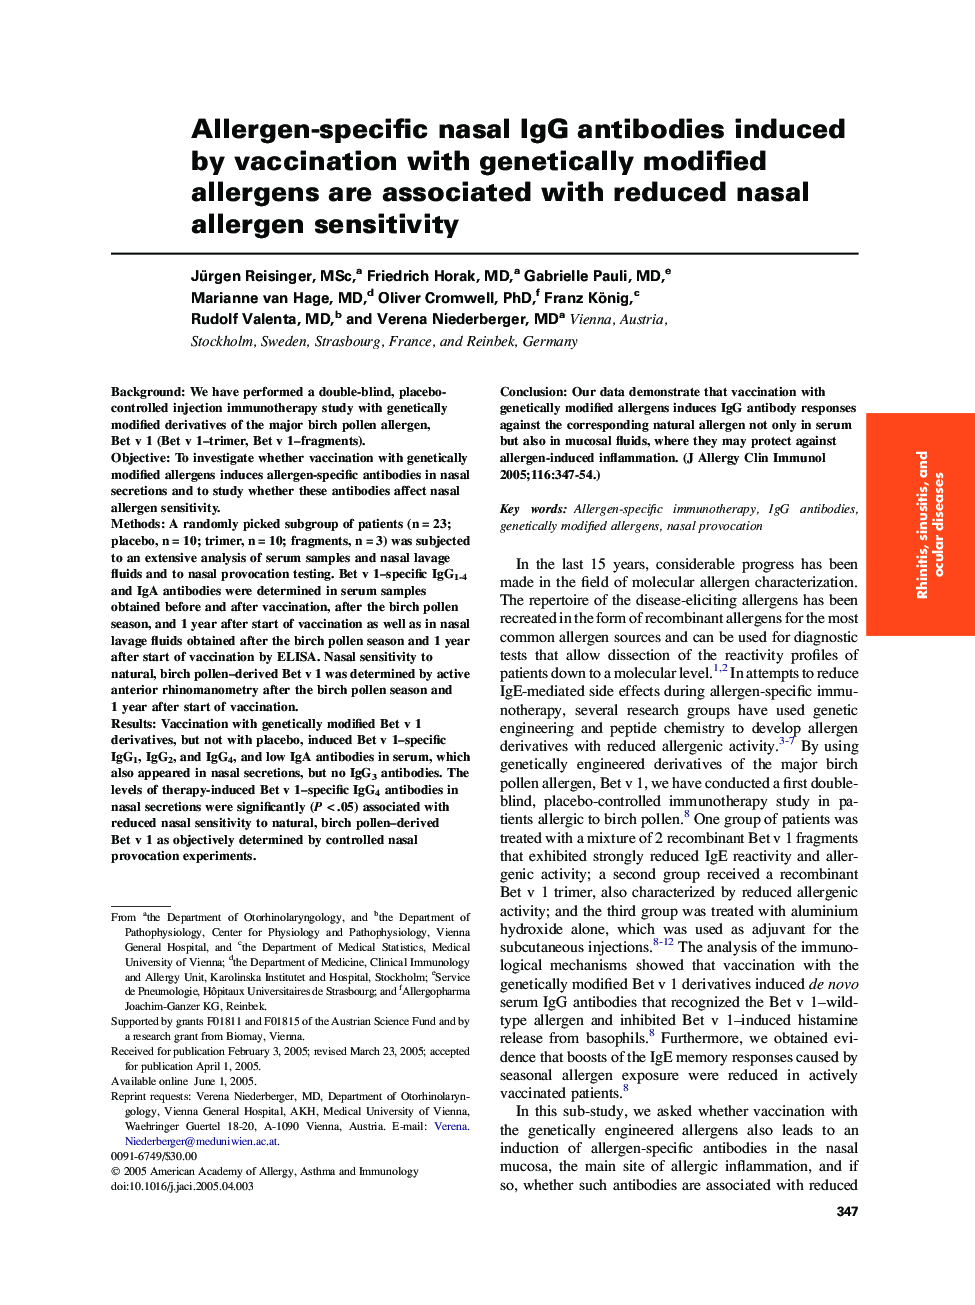 Allergen-specific nasal IgG antibodies induced by vaccination with genetically modified allergens are associated with reduced nasal allergen sensitivity